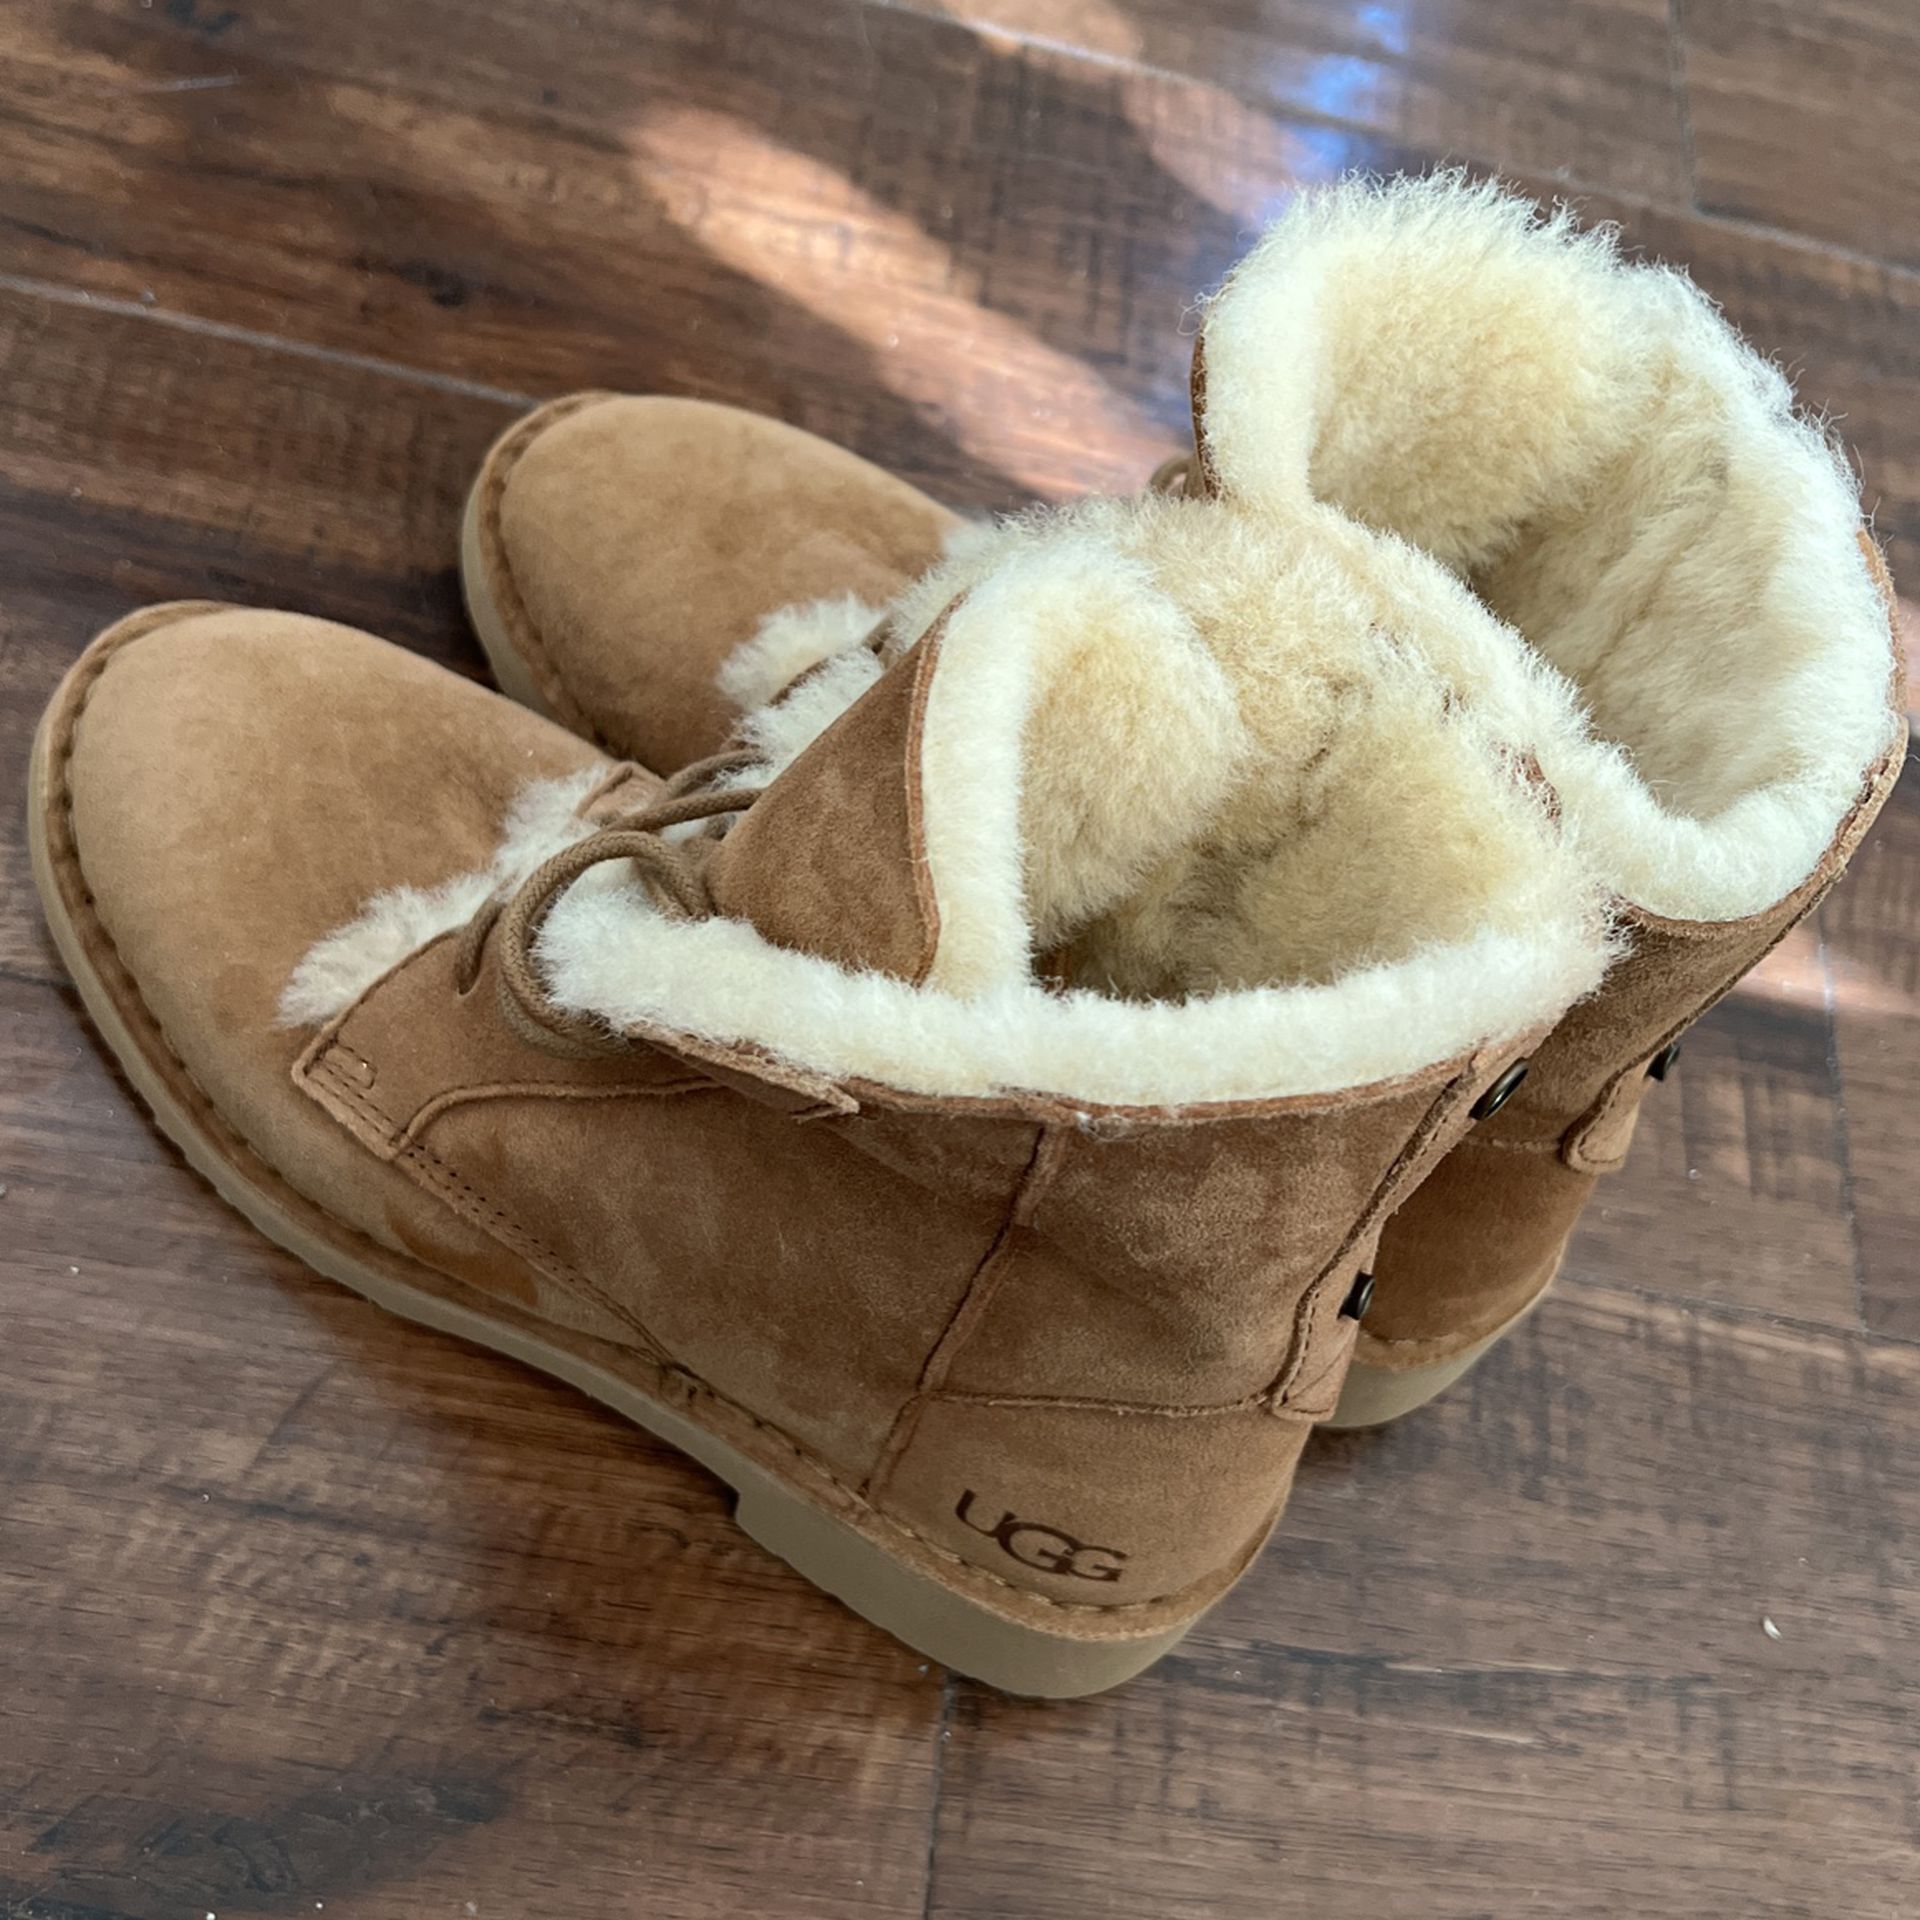 Brand New UGGS Woman’s Size 5 In Chestnut